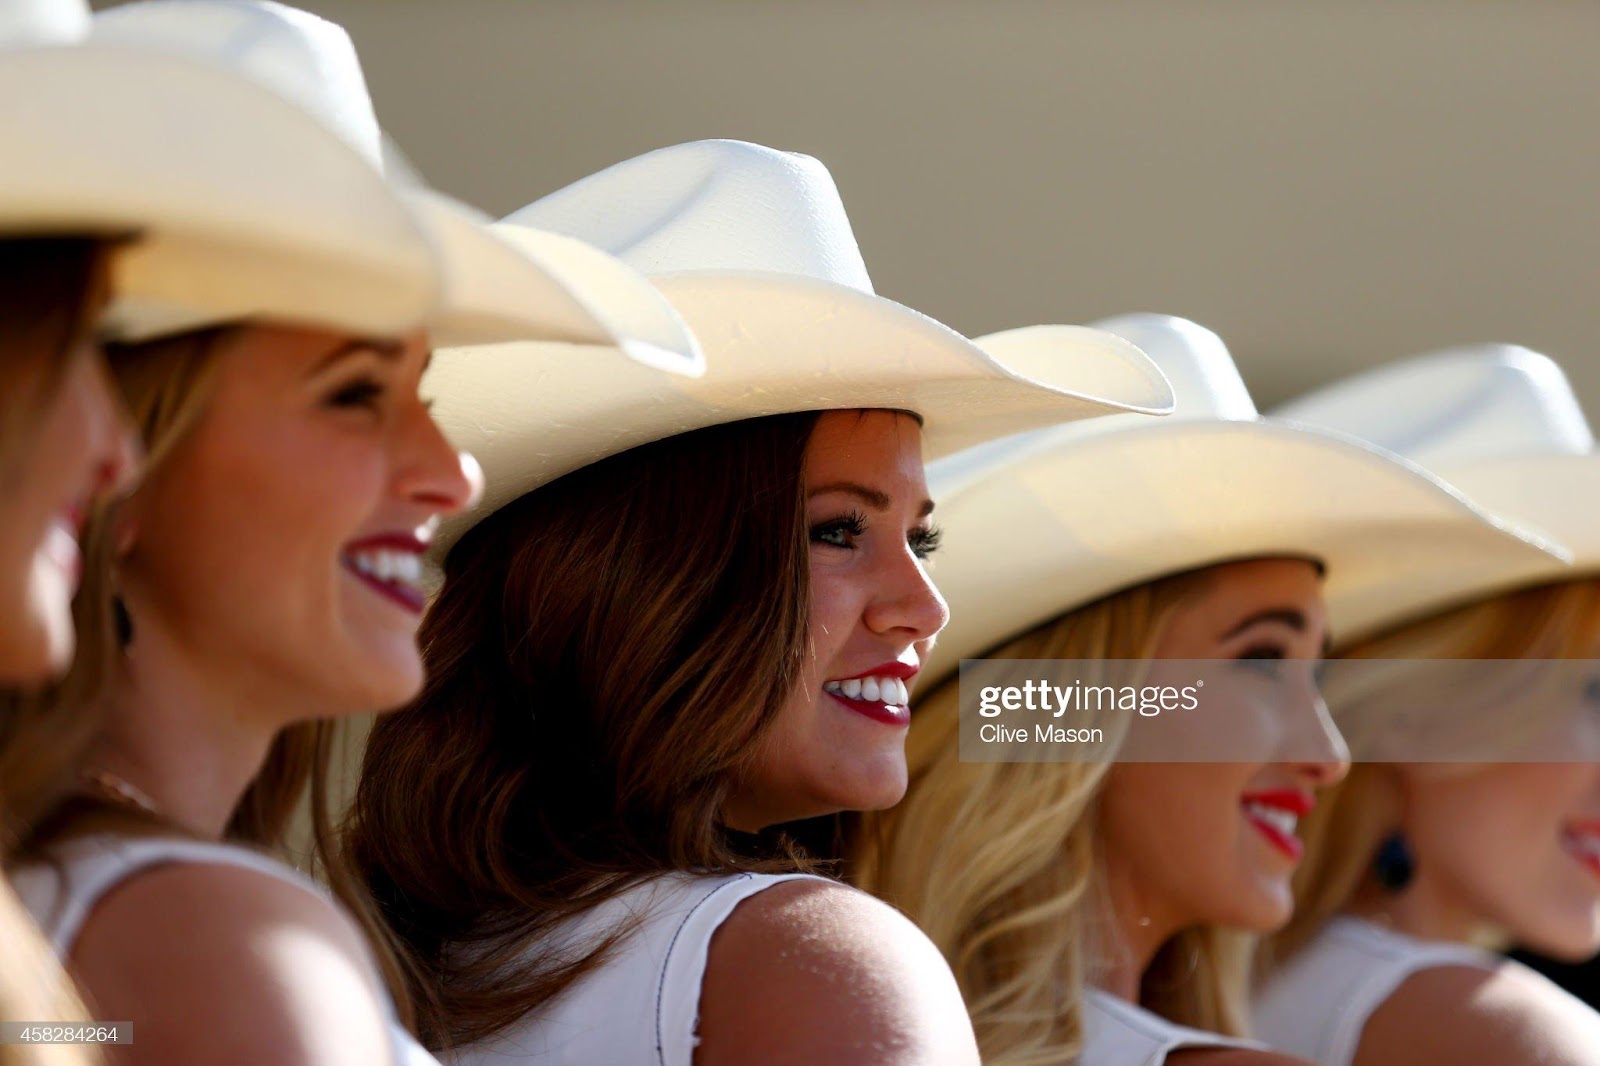 D:\Documenti\posts\posts\Women and motorsport\foto\Getty e altre\grid-girls-pose-before-the-united-states-formula-one-grand-prix-at-picture-id458284264.jpg